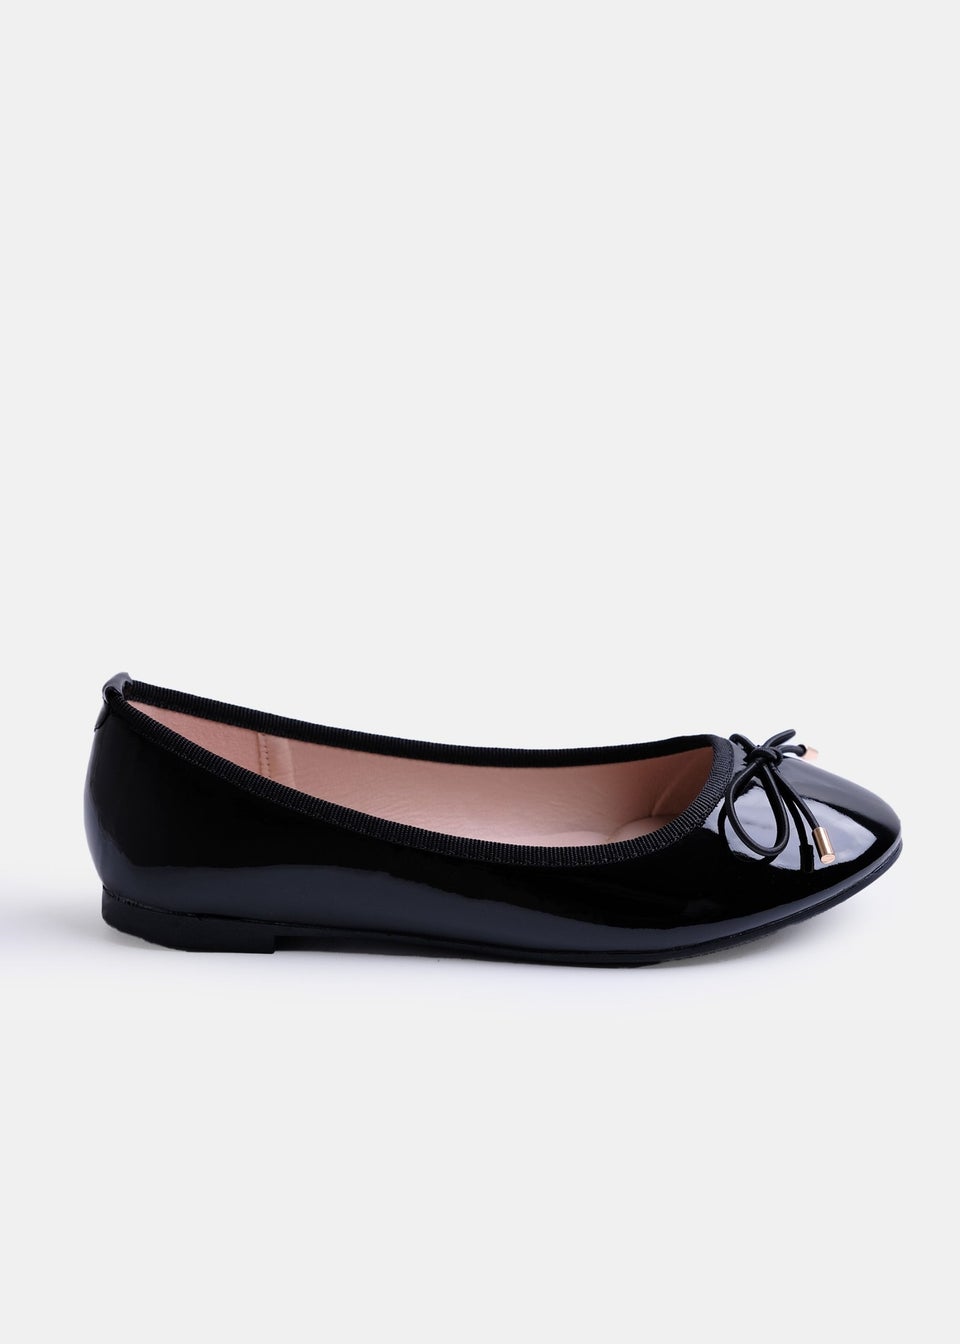 Where's That From Black Tallulah Wide Fit Patent Flat Pumps